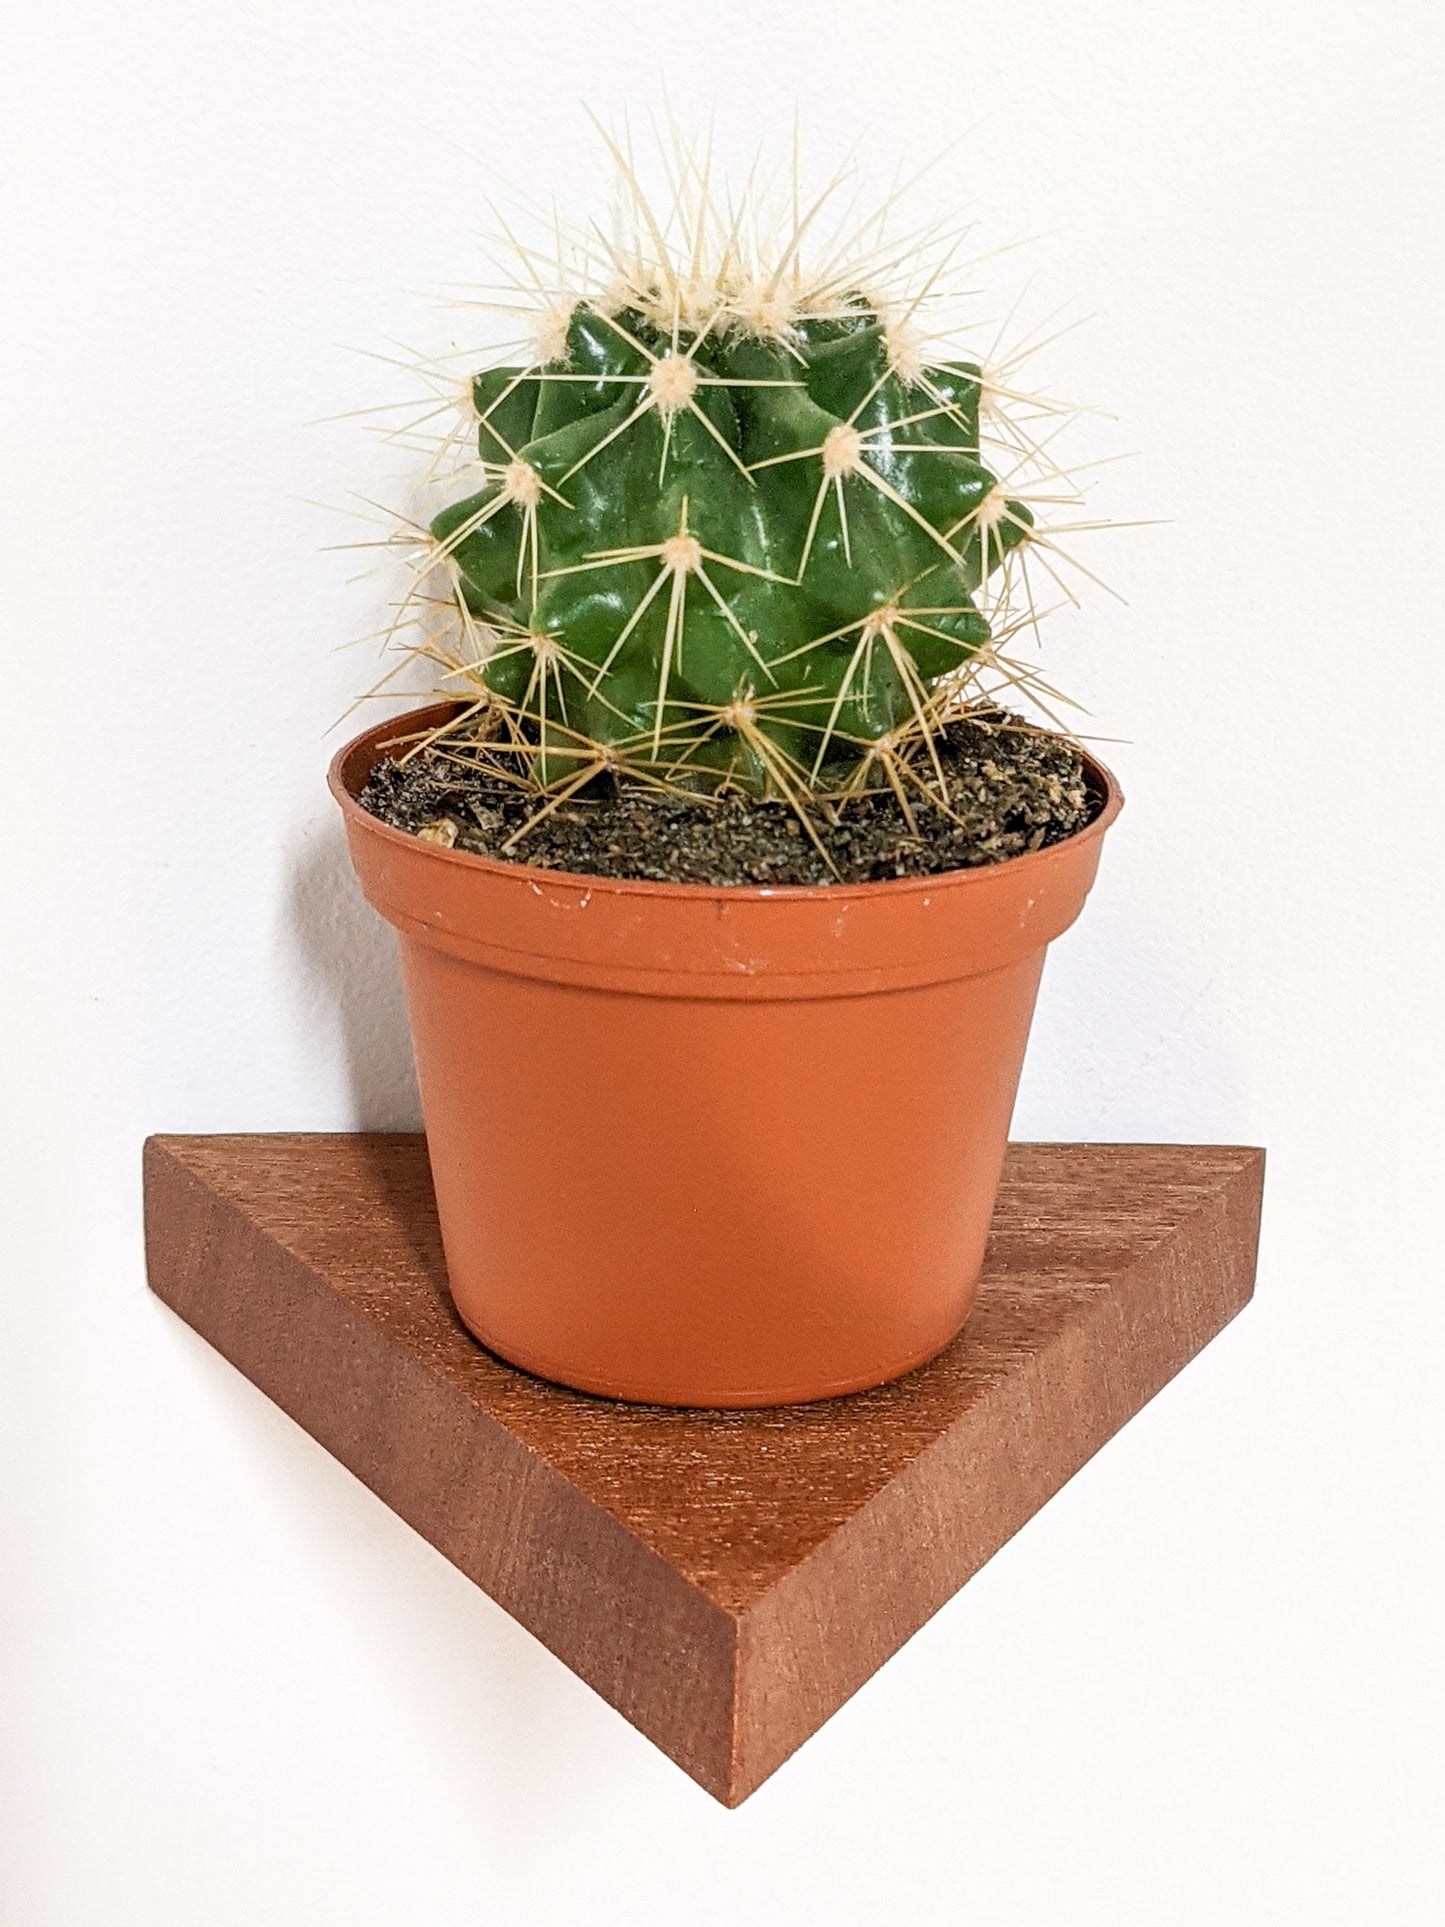 A head-on view of the sharp angles and slightly rounded corners of the small mahogany triangle floating shelf. A cactus sits on the top of the shelf.